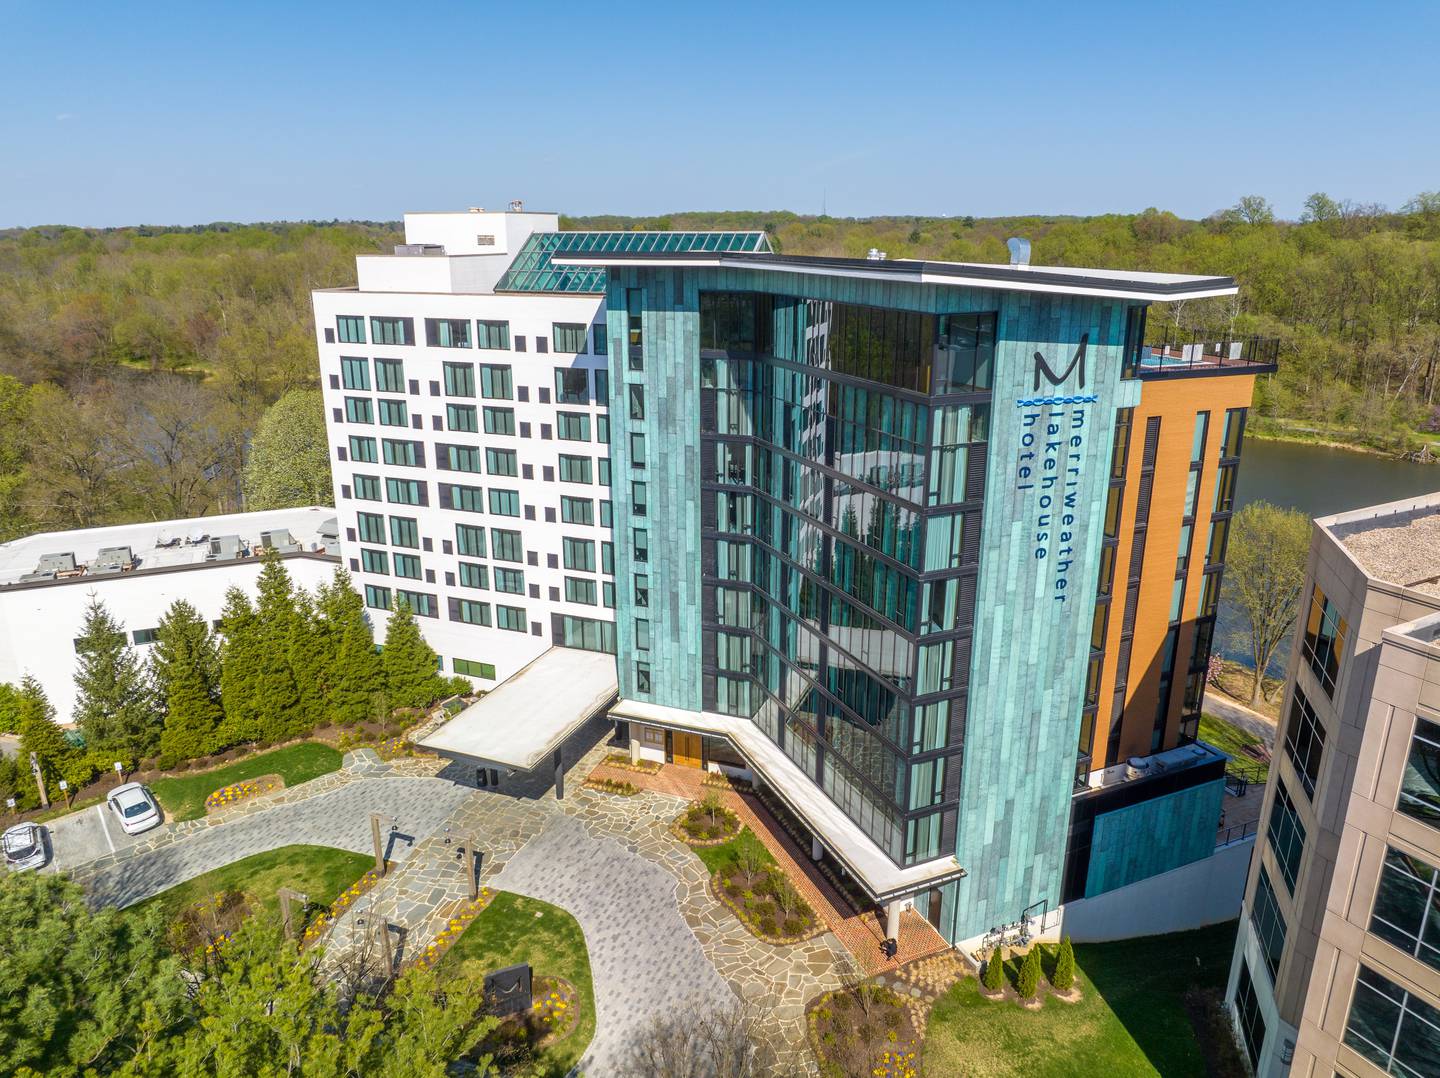 The Marriott Autograph Hotel that sits next to the 1970s-era lodge-style buildings on the shores of Lake Kittamaqundi in downtown Columbia. Costello Construction completed the hotel in November 2021. Photo courtesy David Costello.